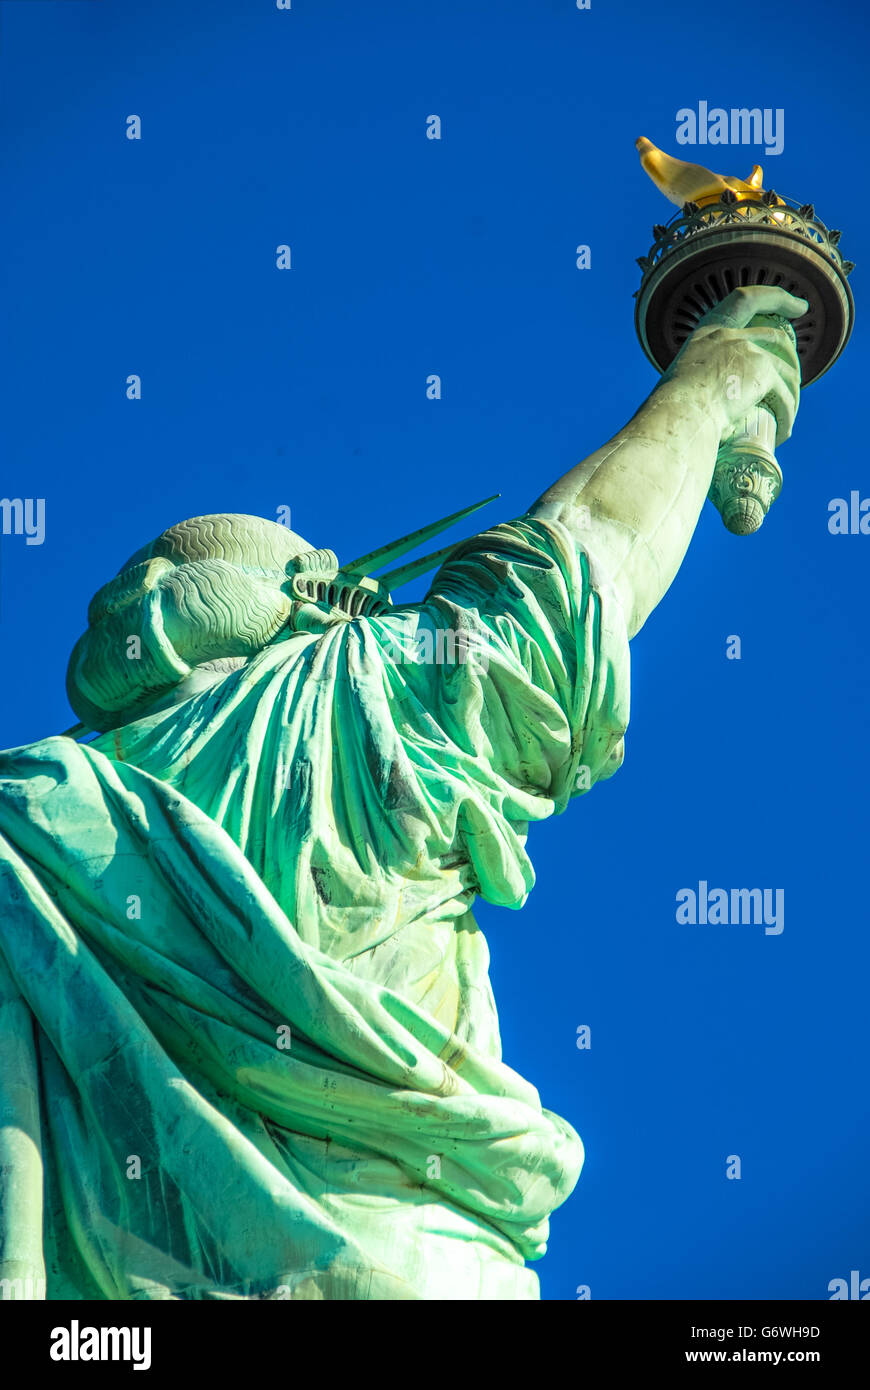 detail of statue of liberty at new york usa Stock Photo